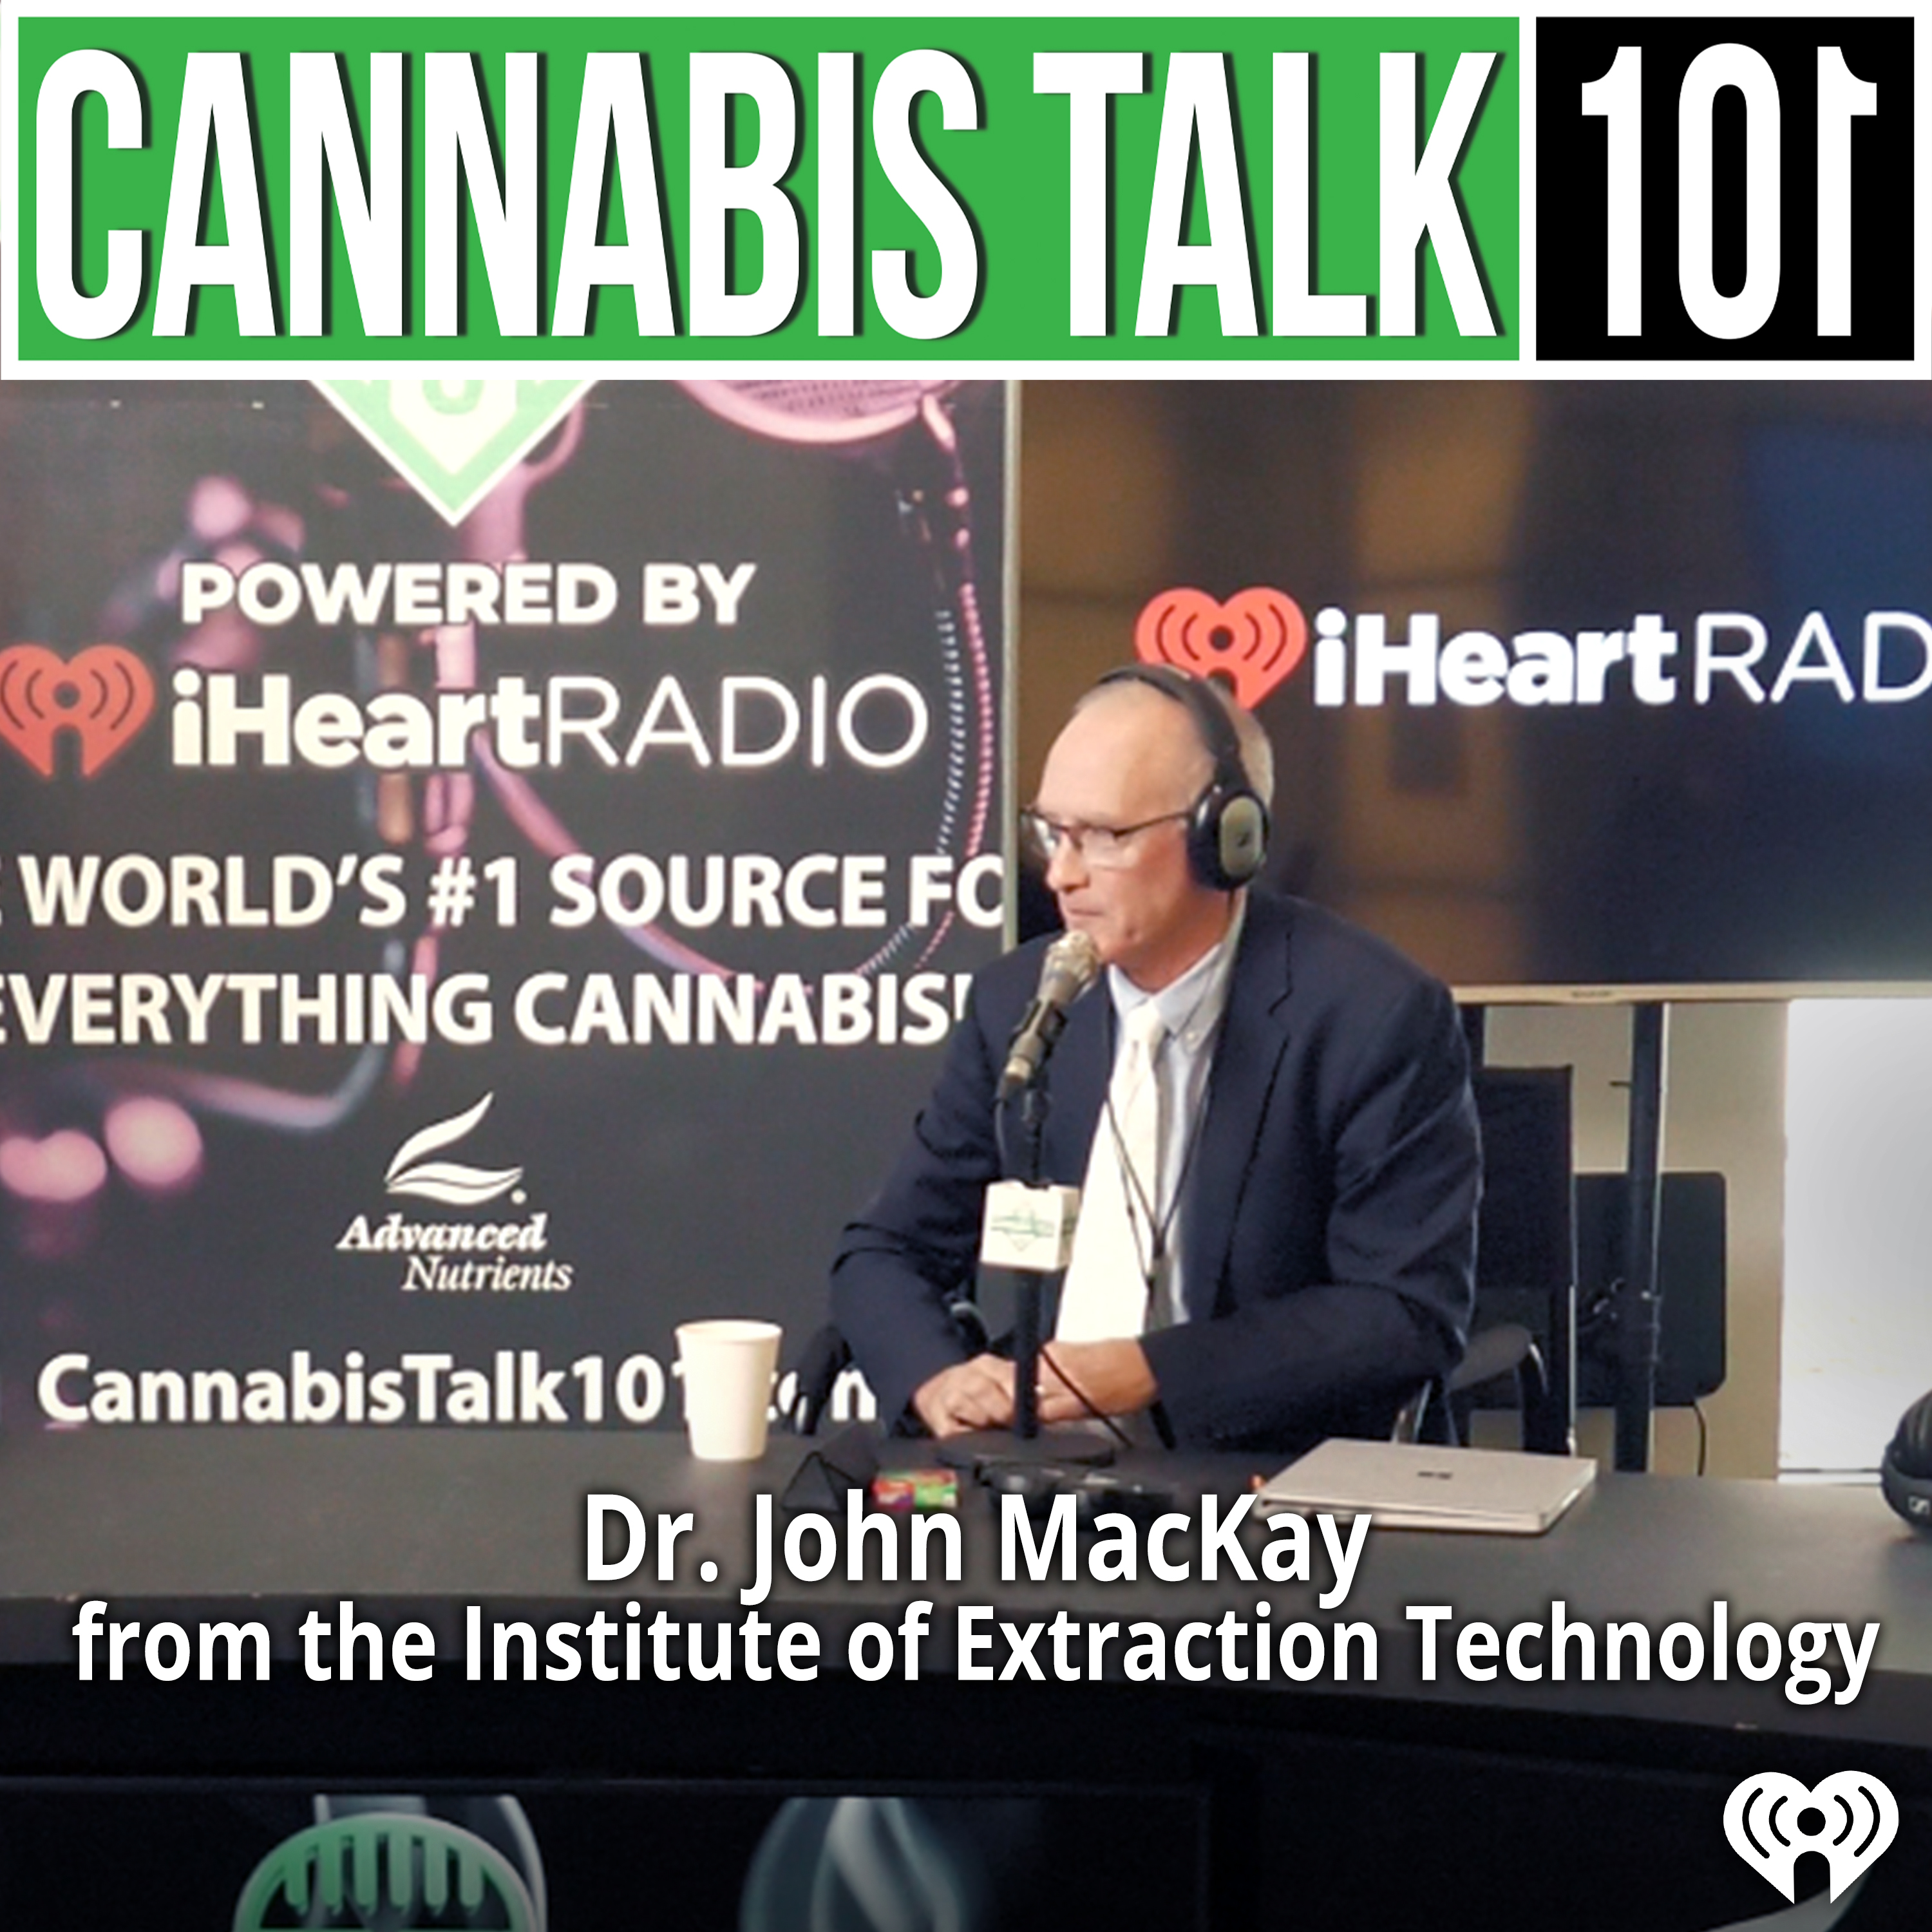 Dr. John MacKay from the Institute of Extraction Technology